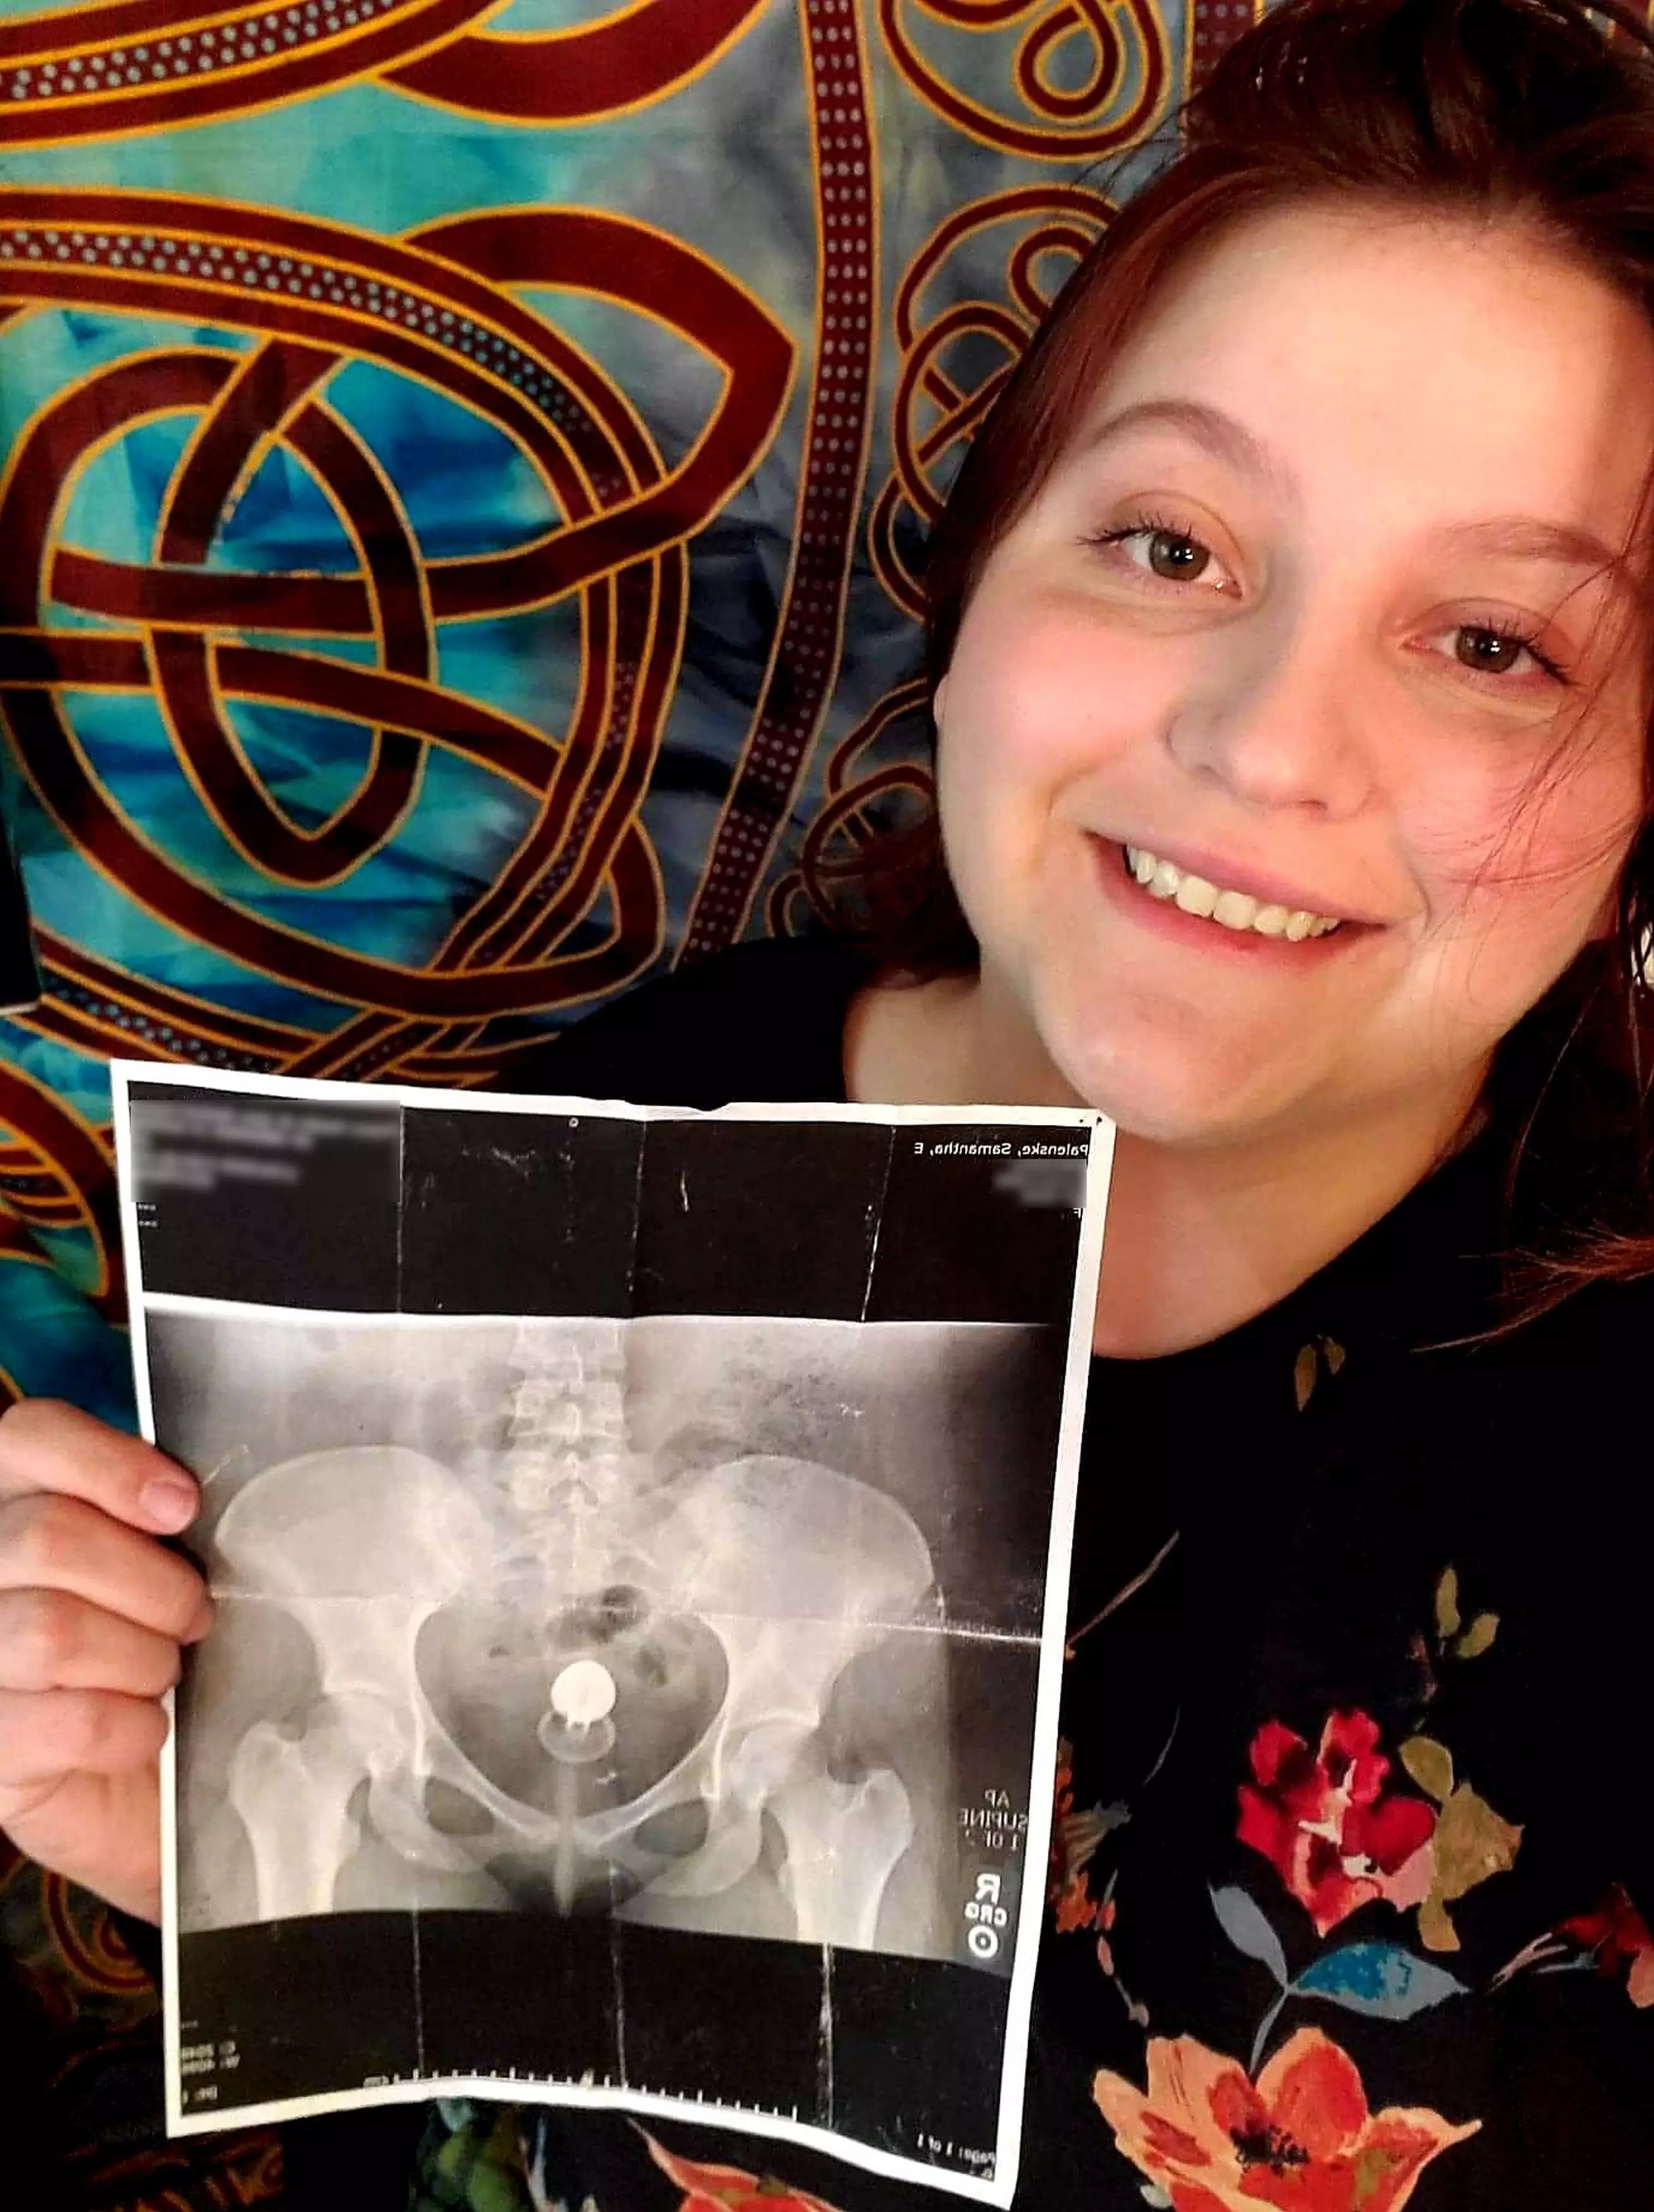 Samantha proudly posing with a print out of her x-ray...